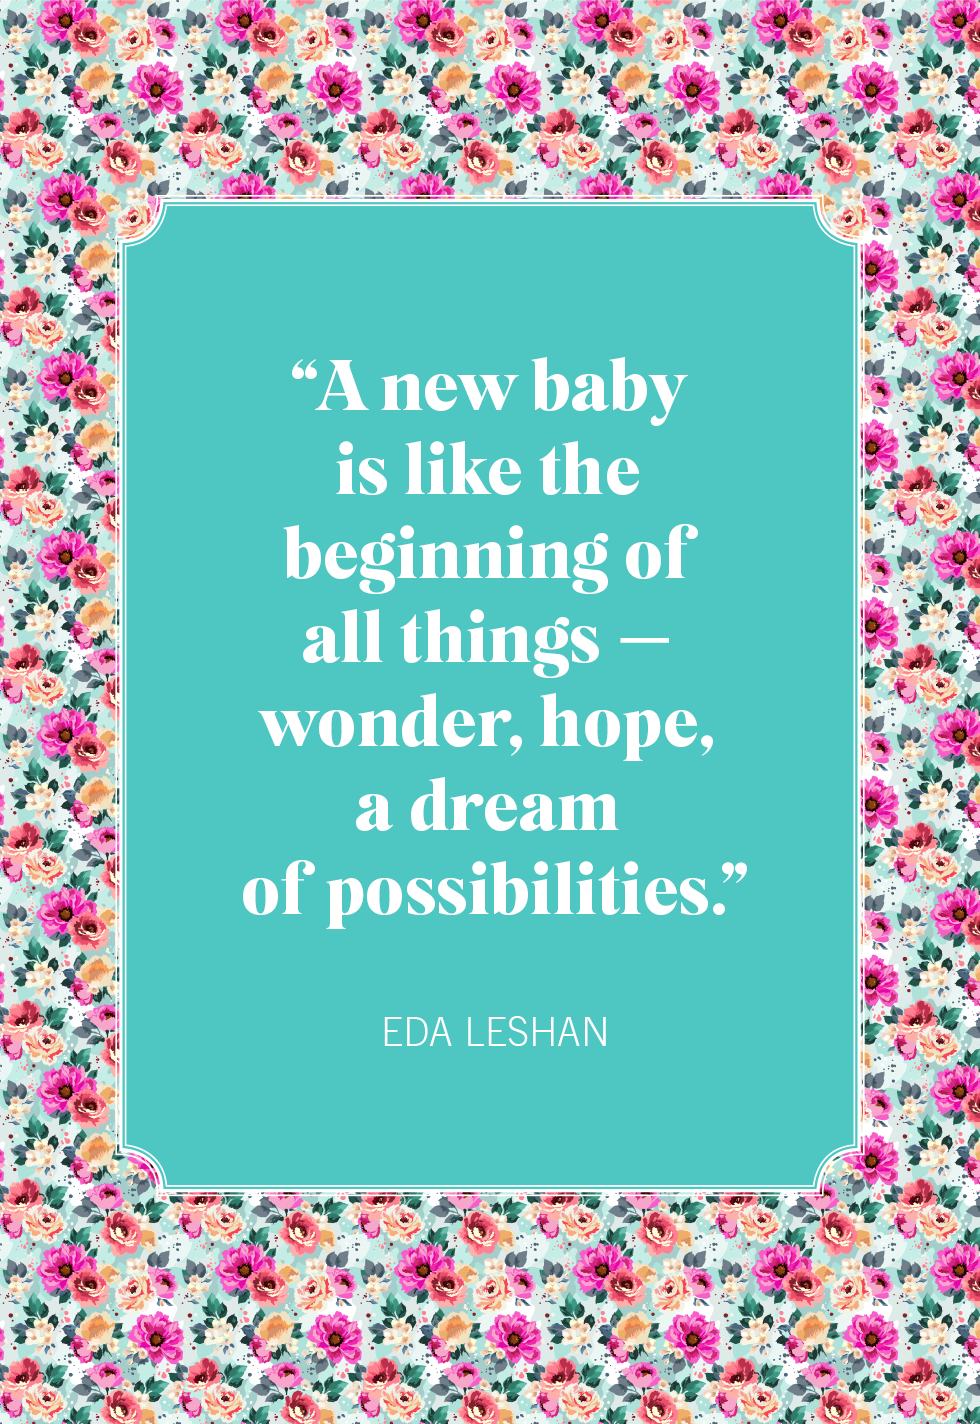 Encouraging Words: Quotes to Uplift New Moms